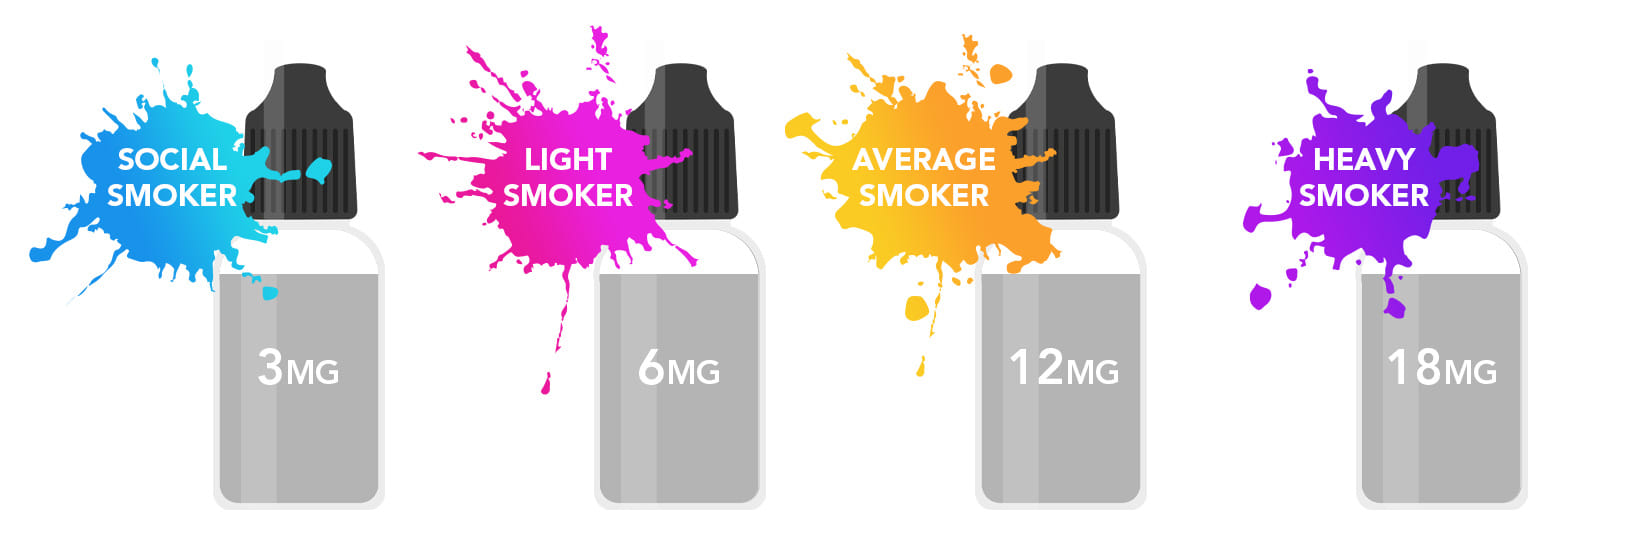 How to Select the Right Nicotine Strength for Your Vaping Journey